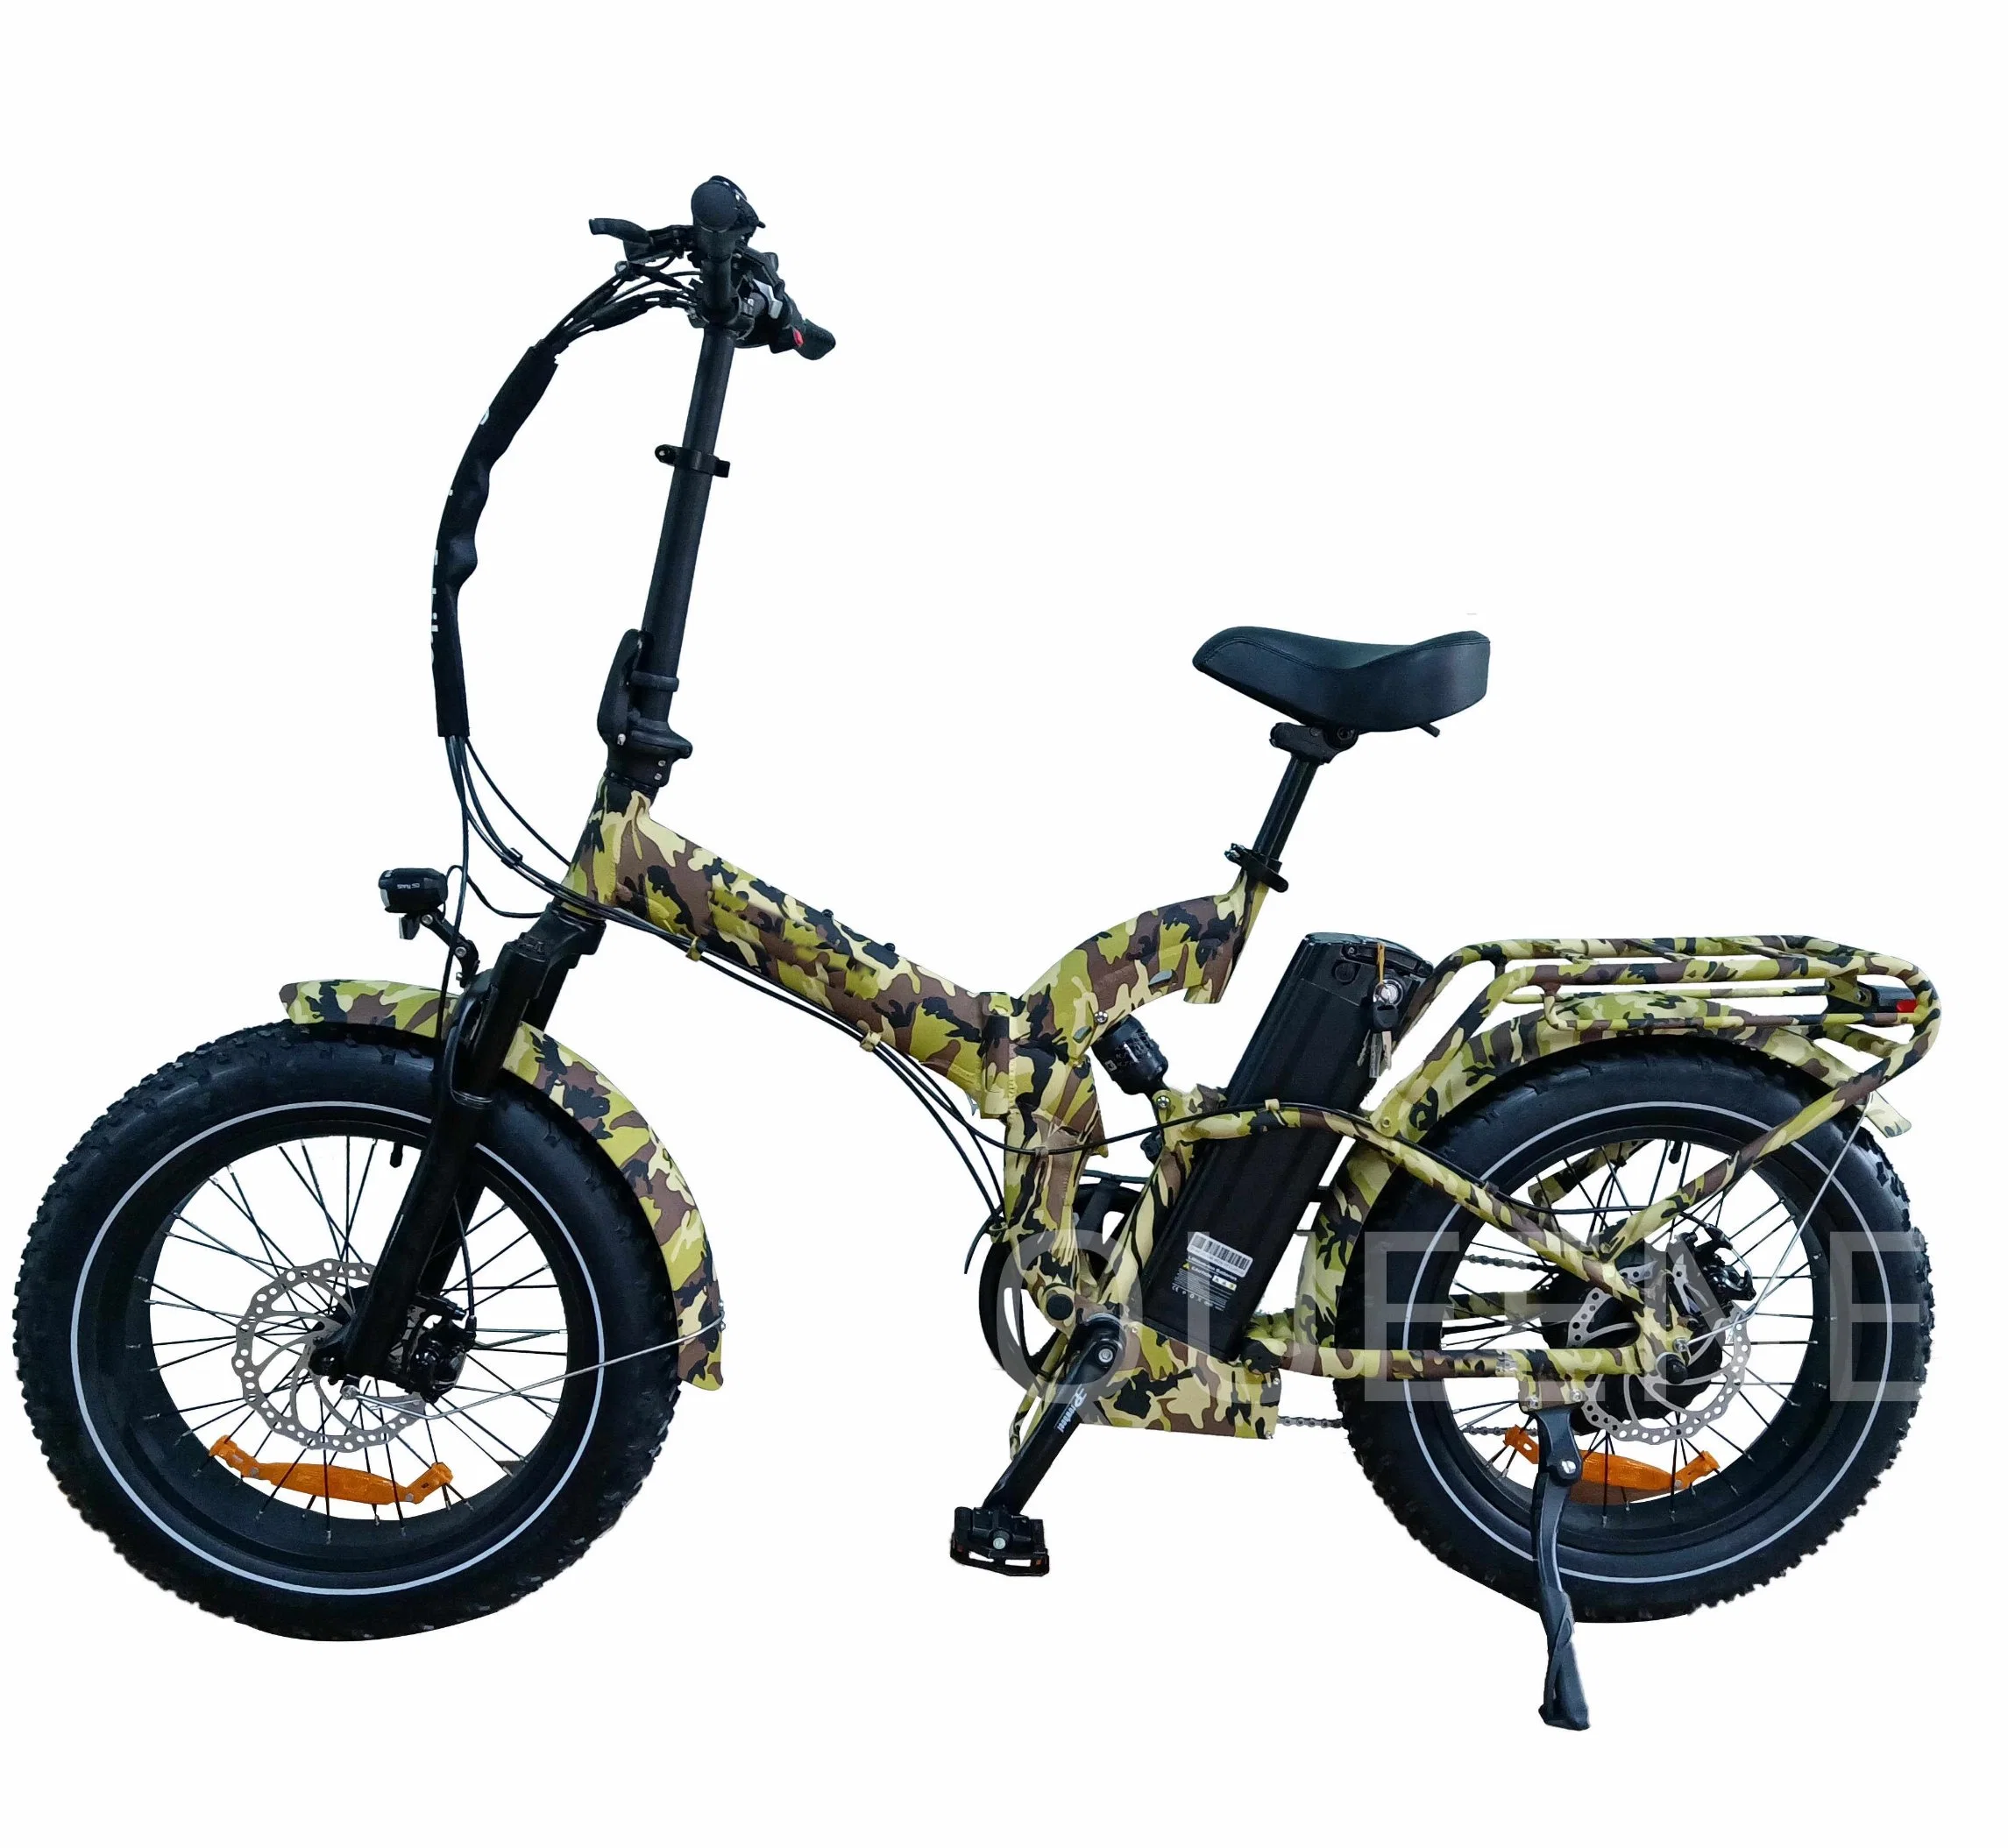 Queene/City Road 48V 750W 1000W Fat Tire Dirt E Bike with Full Suspension Ebike Electric Electrical Electronic